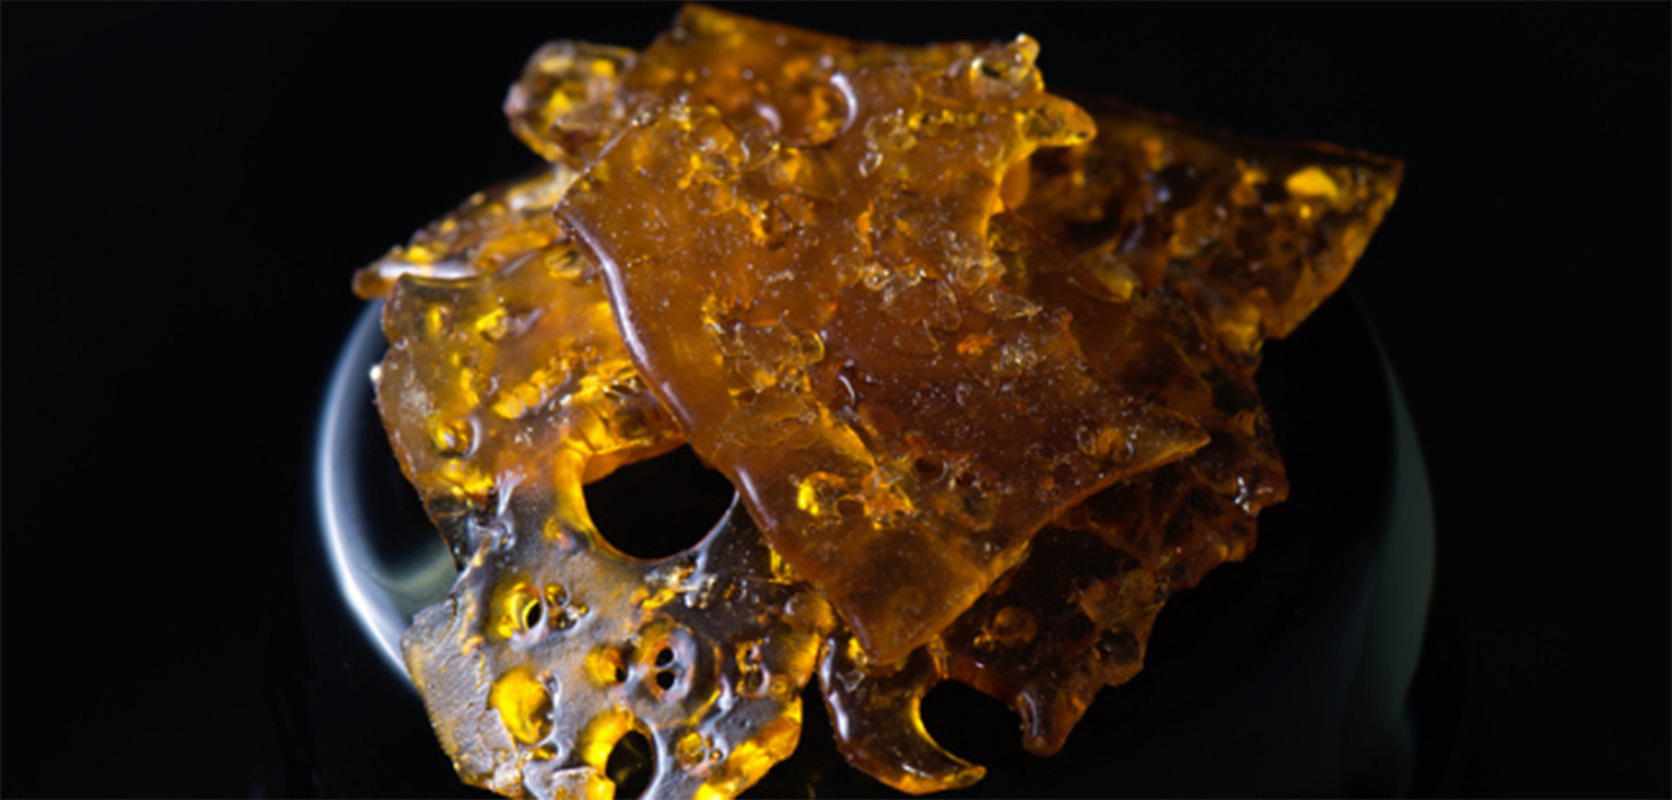 shatter THC concentrate and dark shatter for dabs at Low Price Bud weed dispensary for mail order marijuana and weed online Canada.